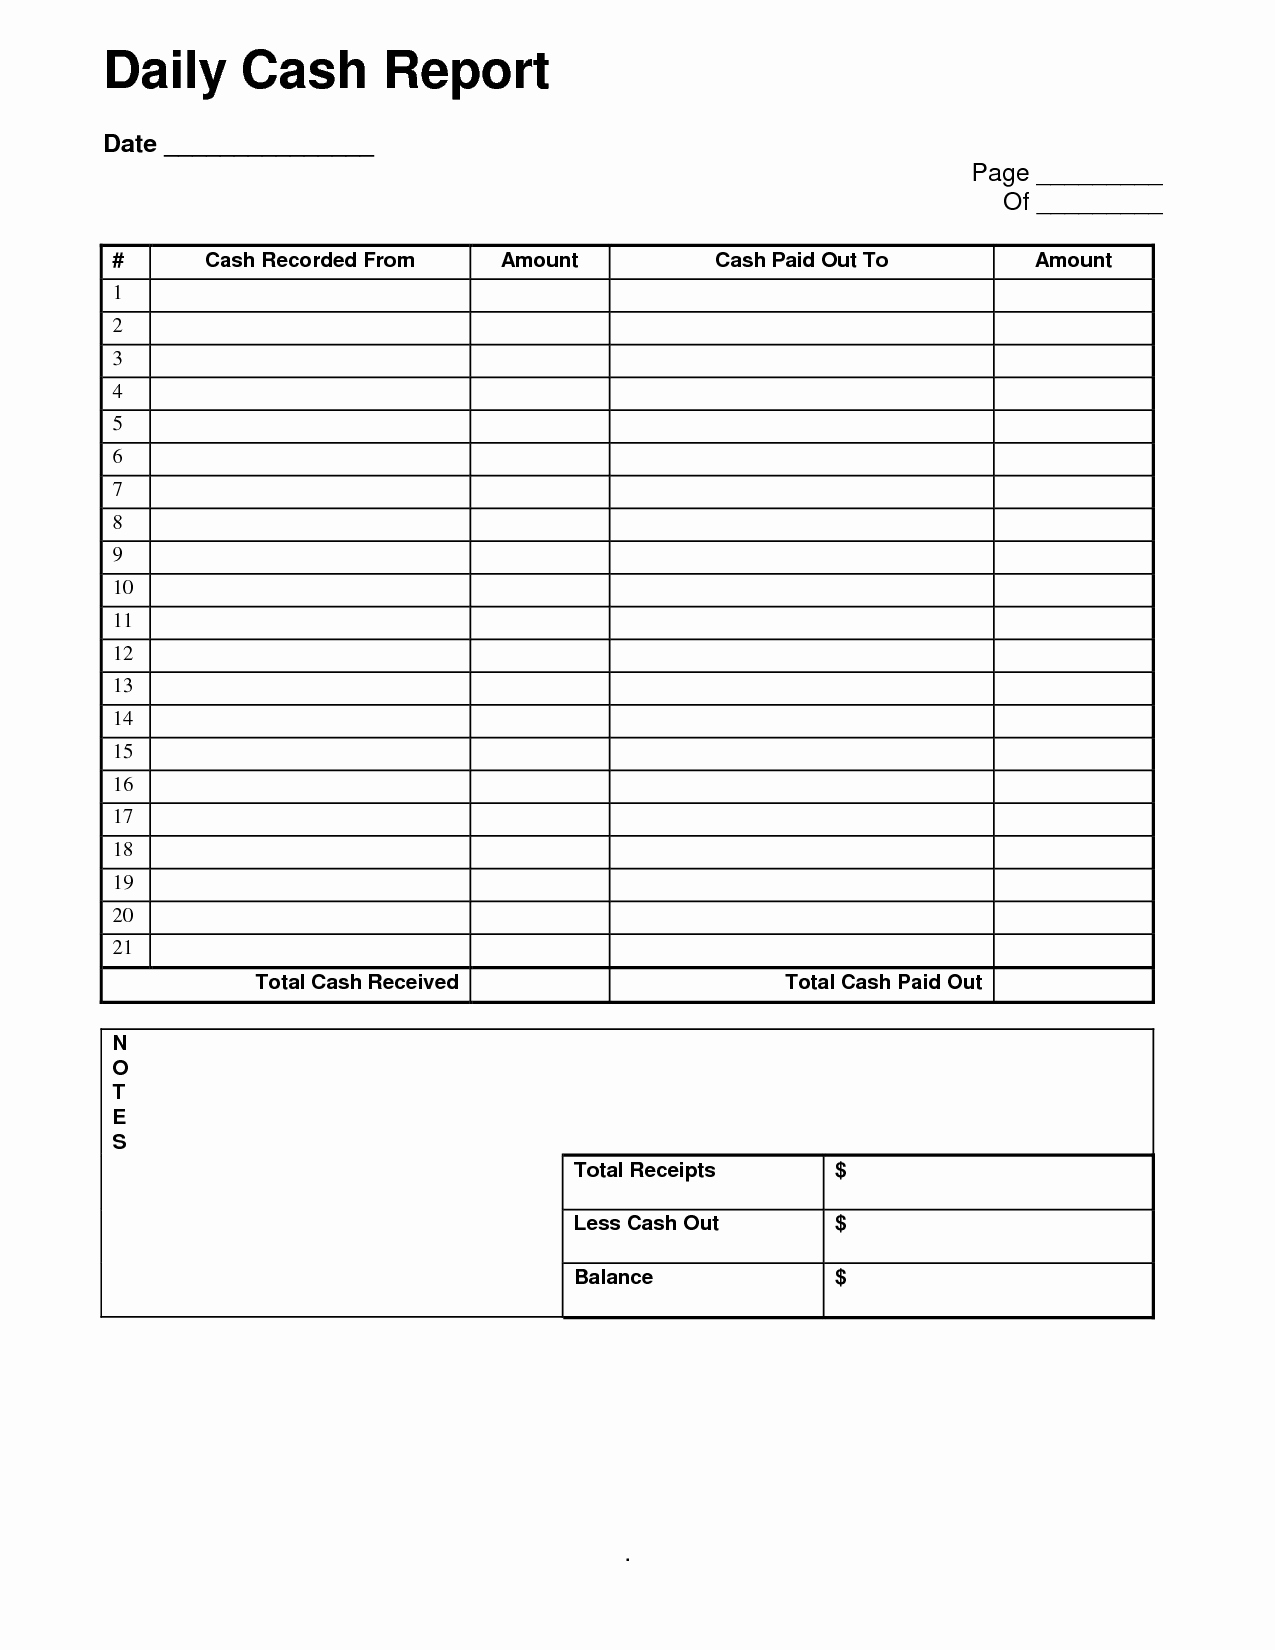 Use Of Funds Template Lovely Easy to Use Daily Cash Report Template Sample Designed by